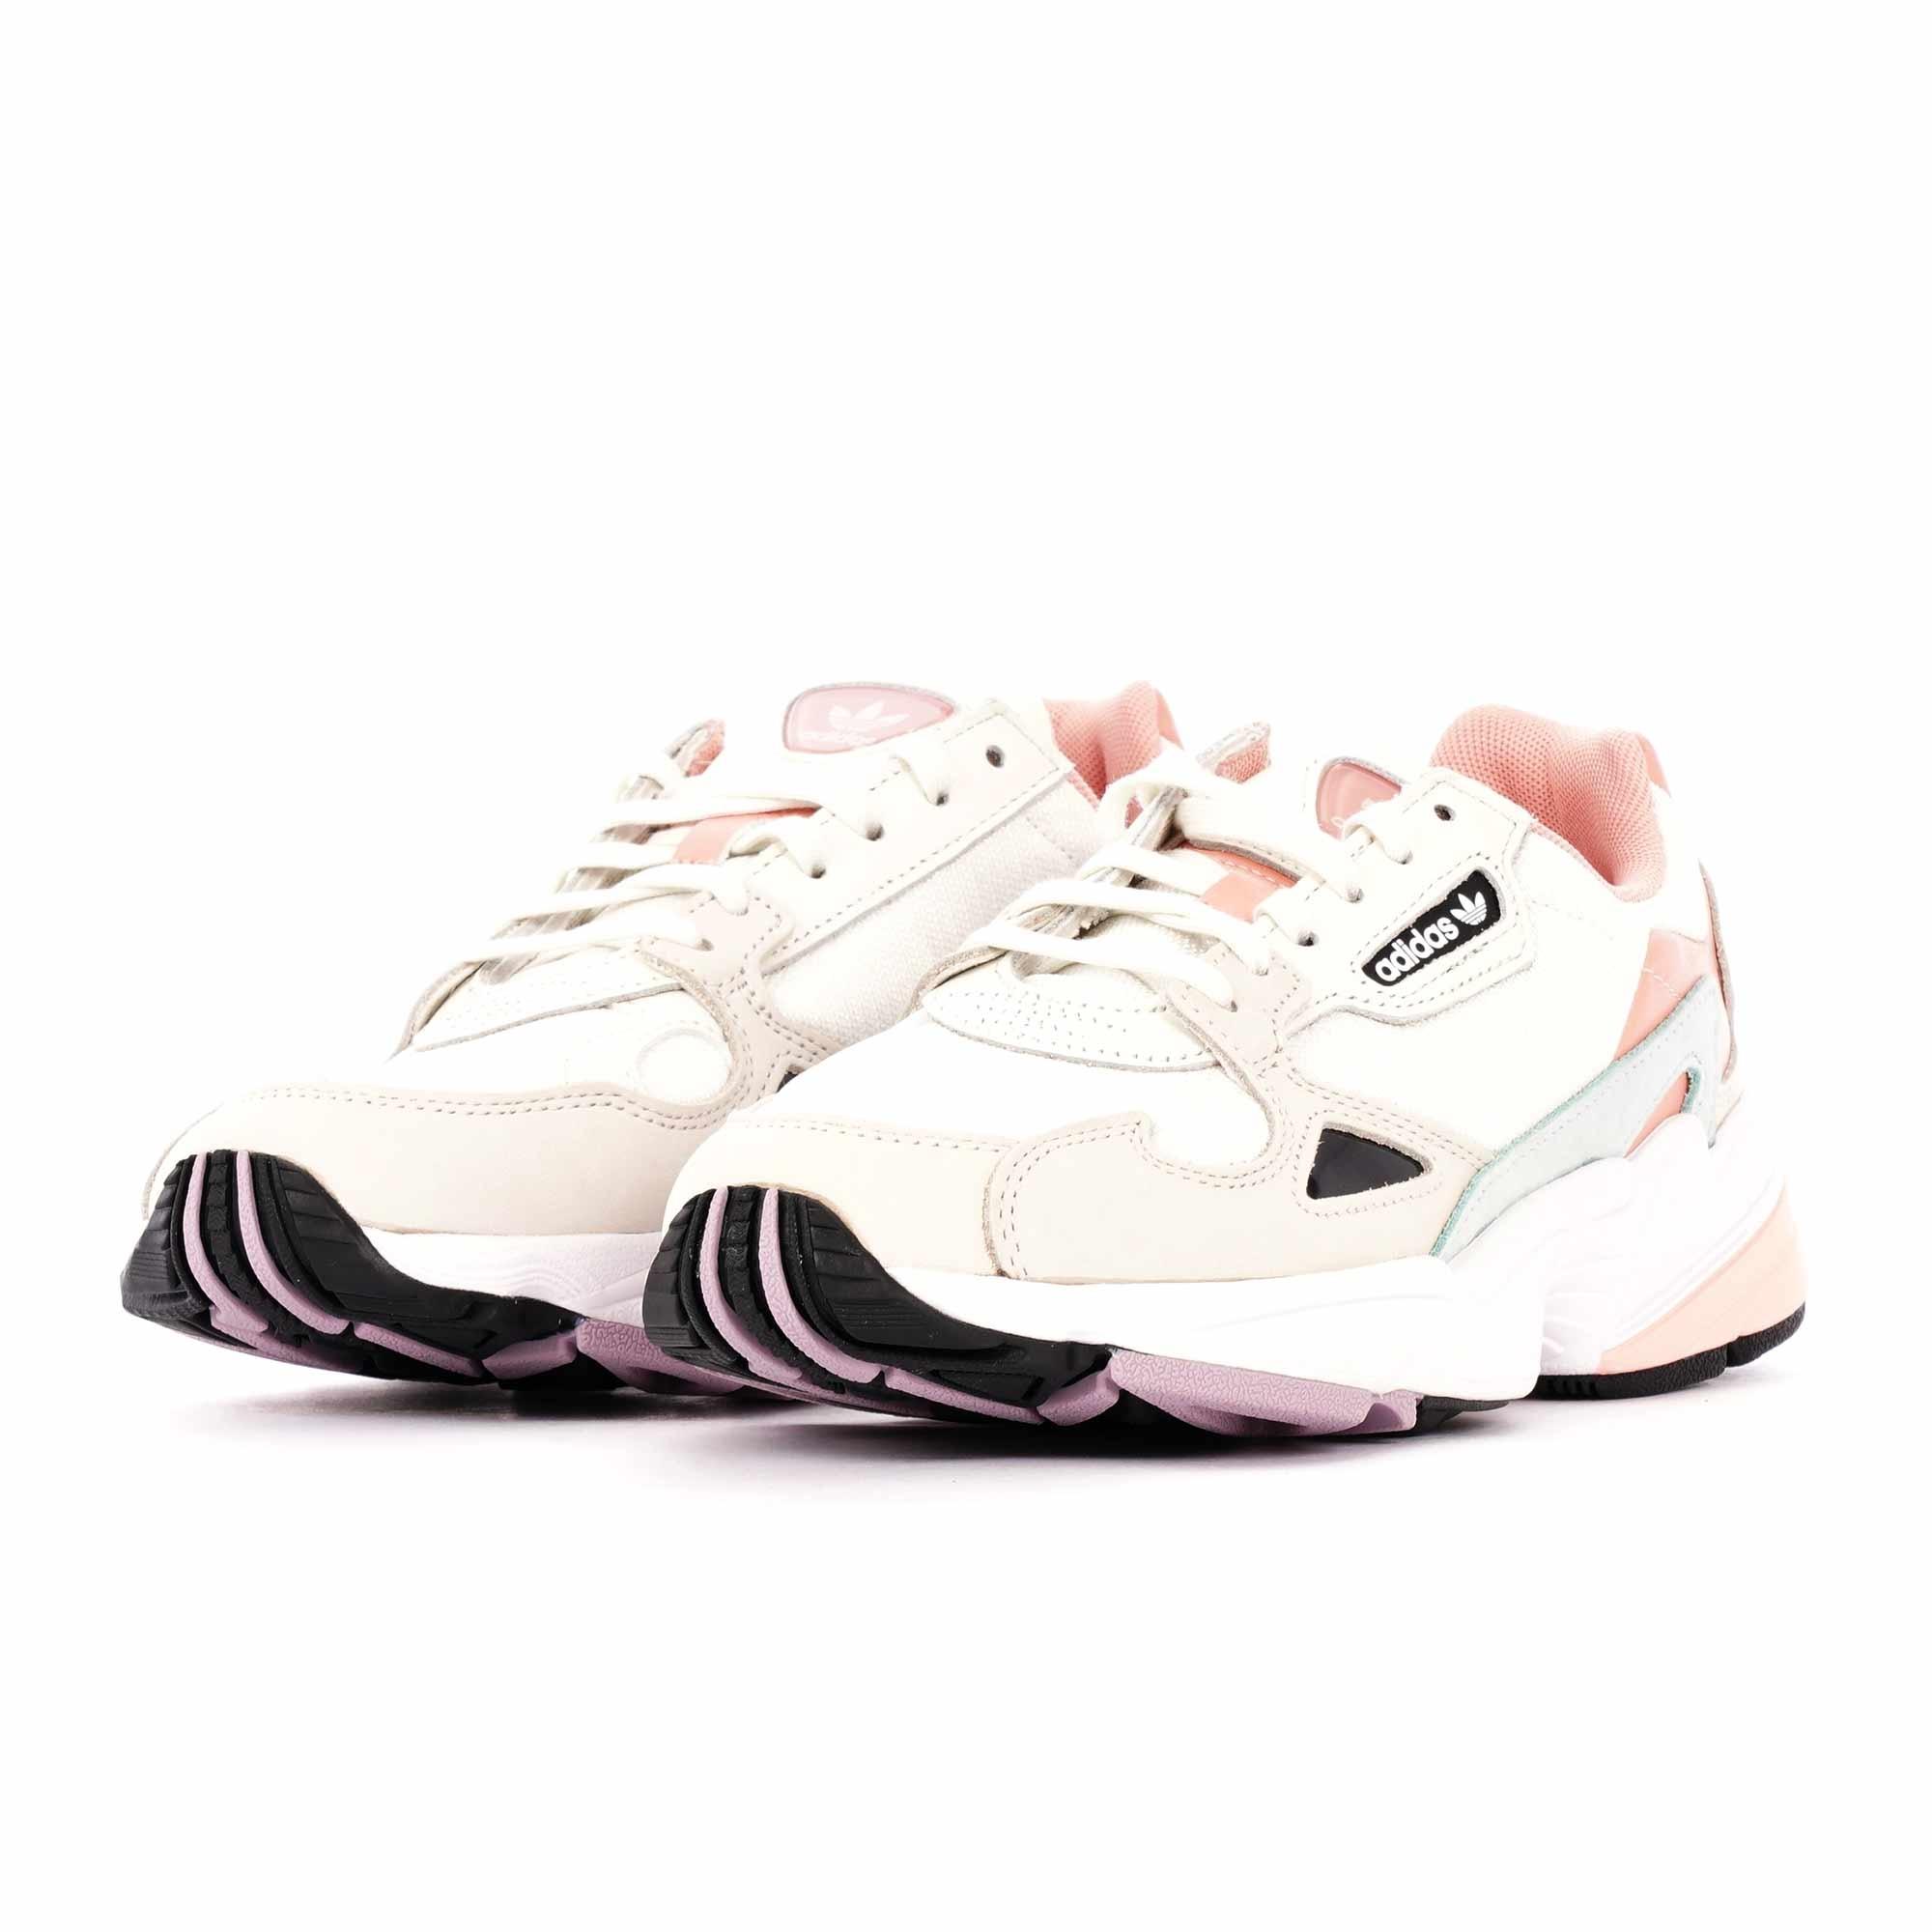 adidas Originals Leather Falcon - White Tint, Raw White & Trace Pink - Lyst